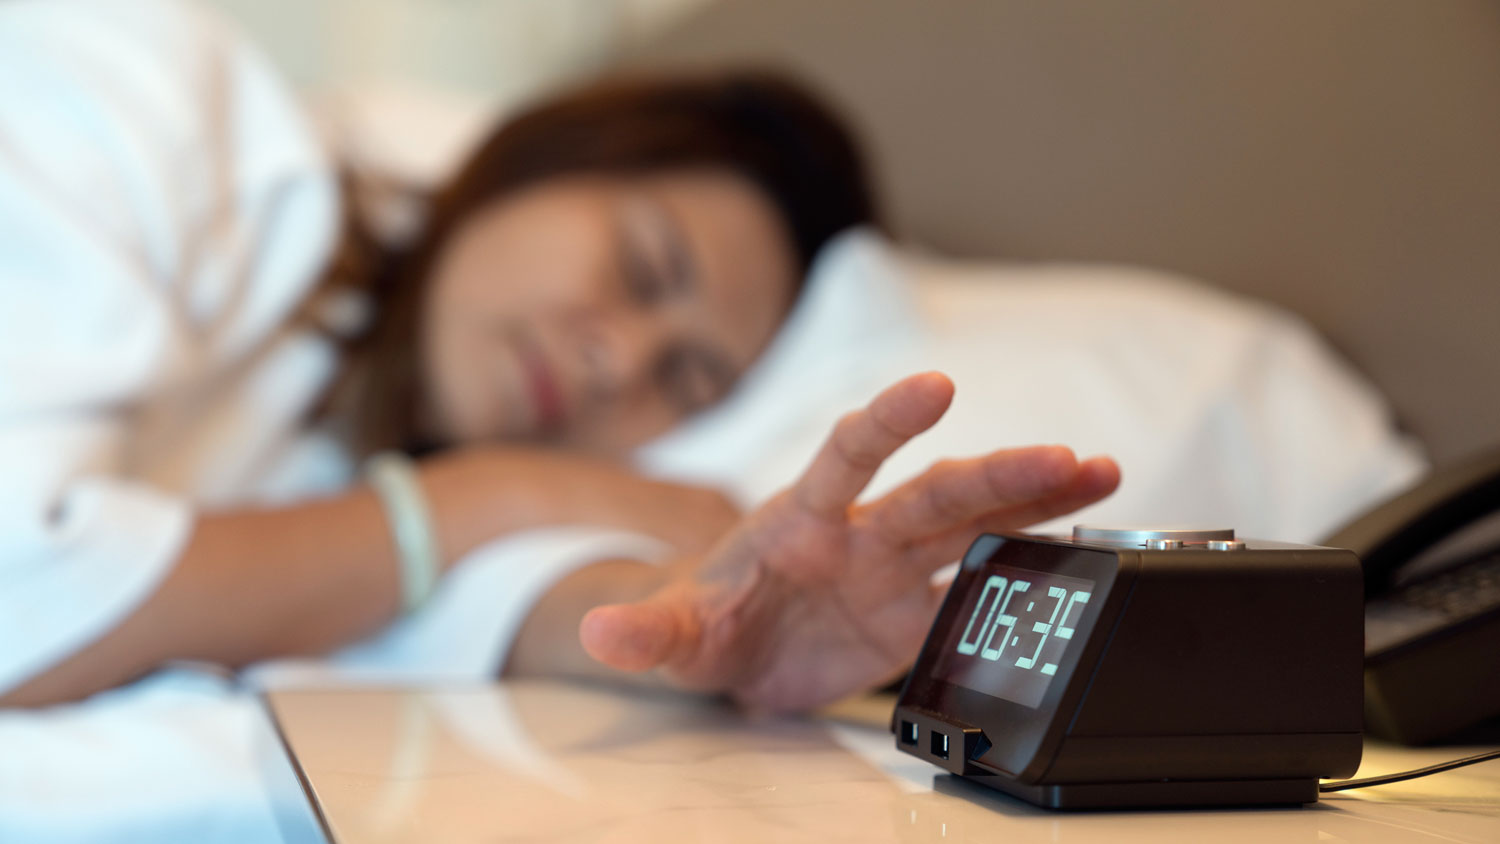 A person reaching for the snooze button on their alarm clock